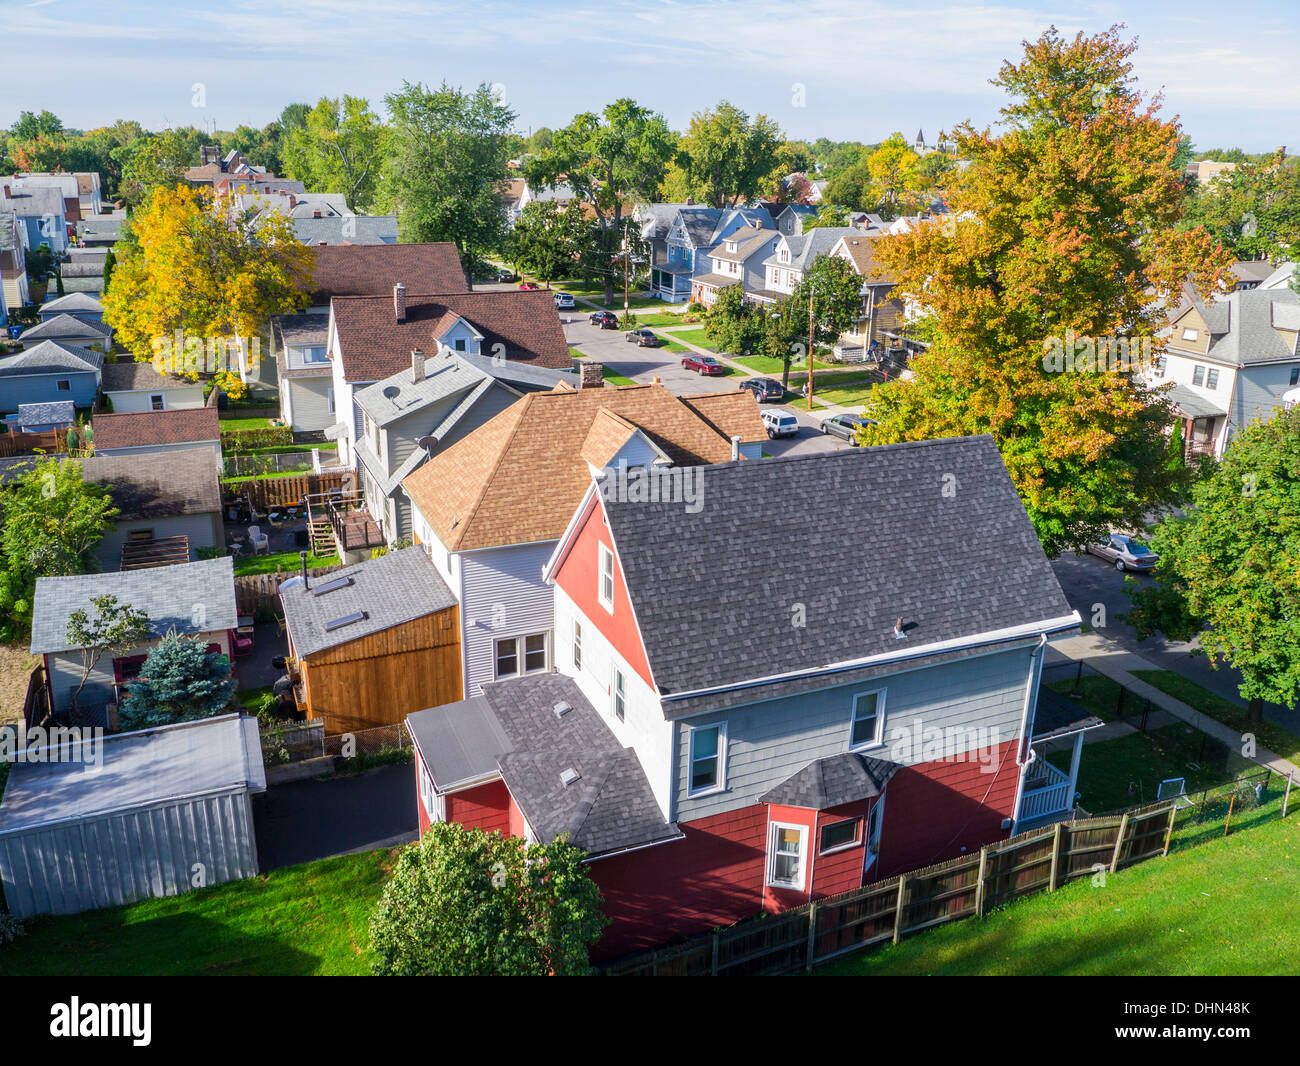 Looking down from above at a residential area of South Buffalo New York United States Stock Photo